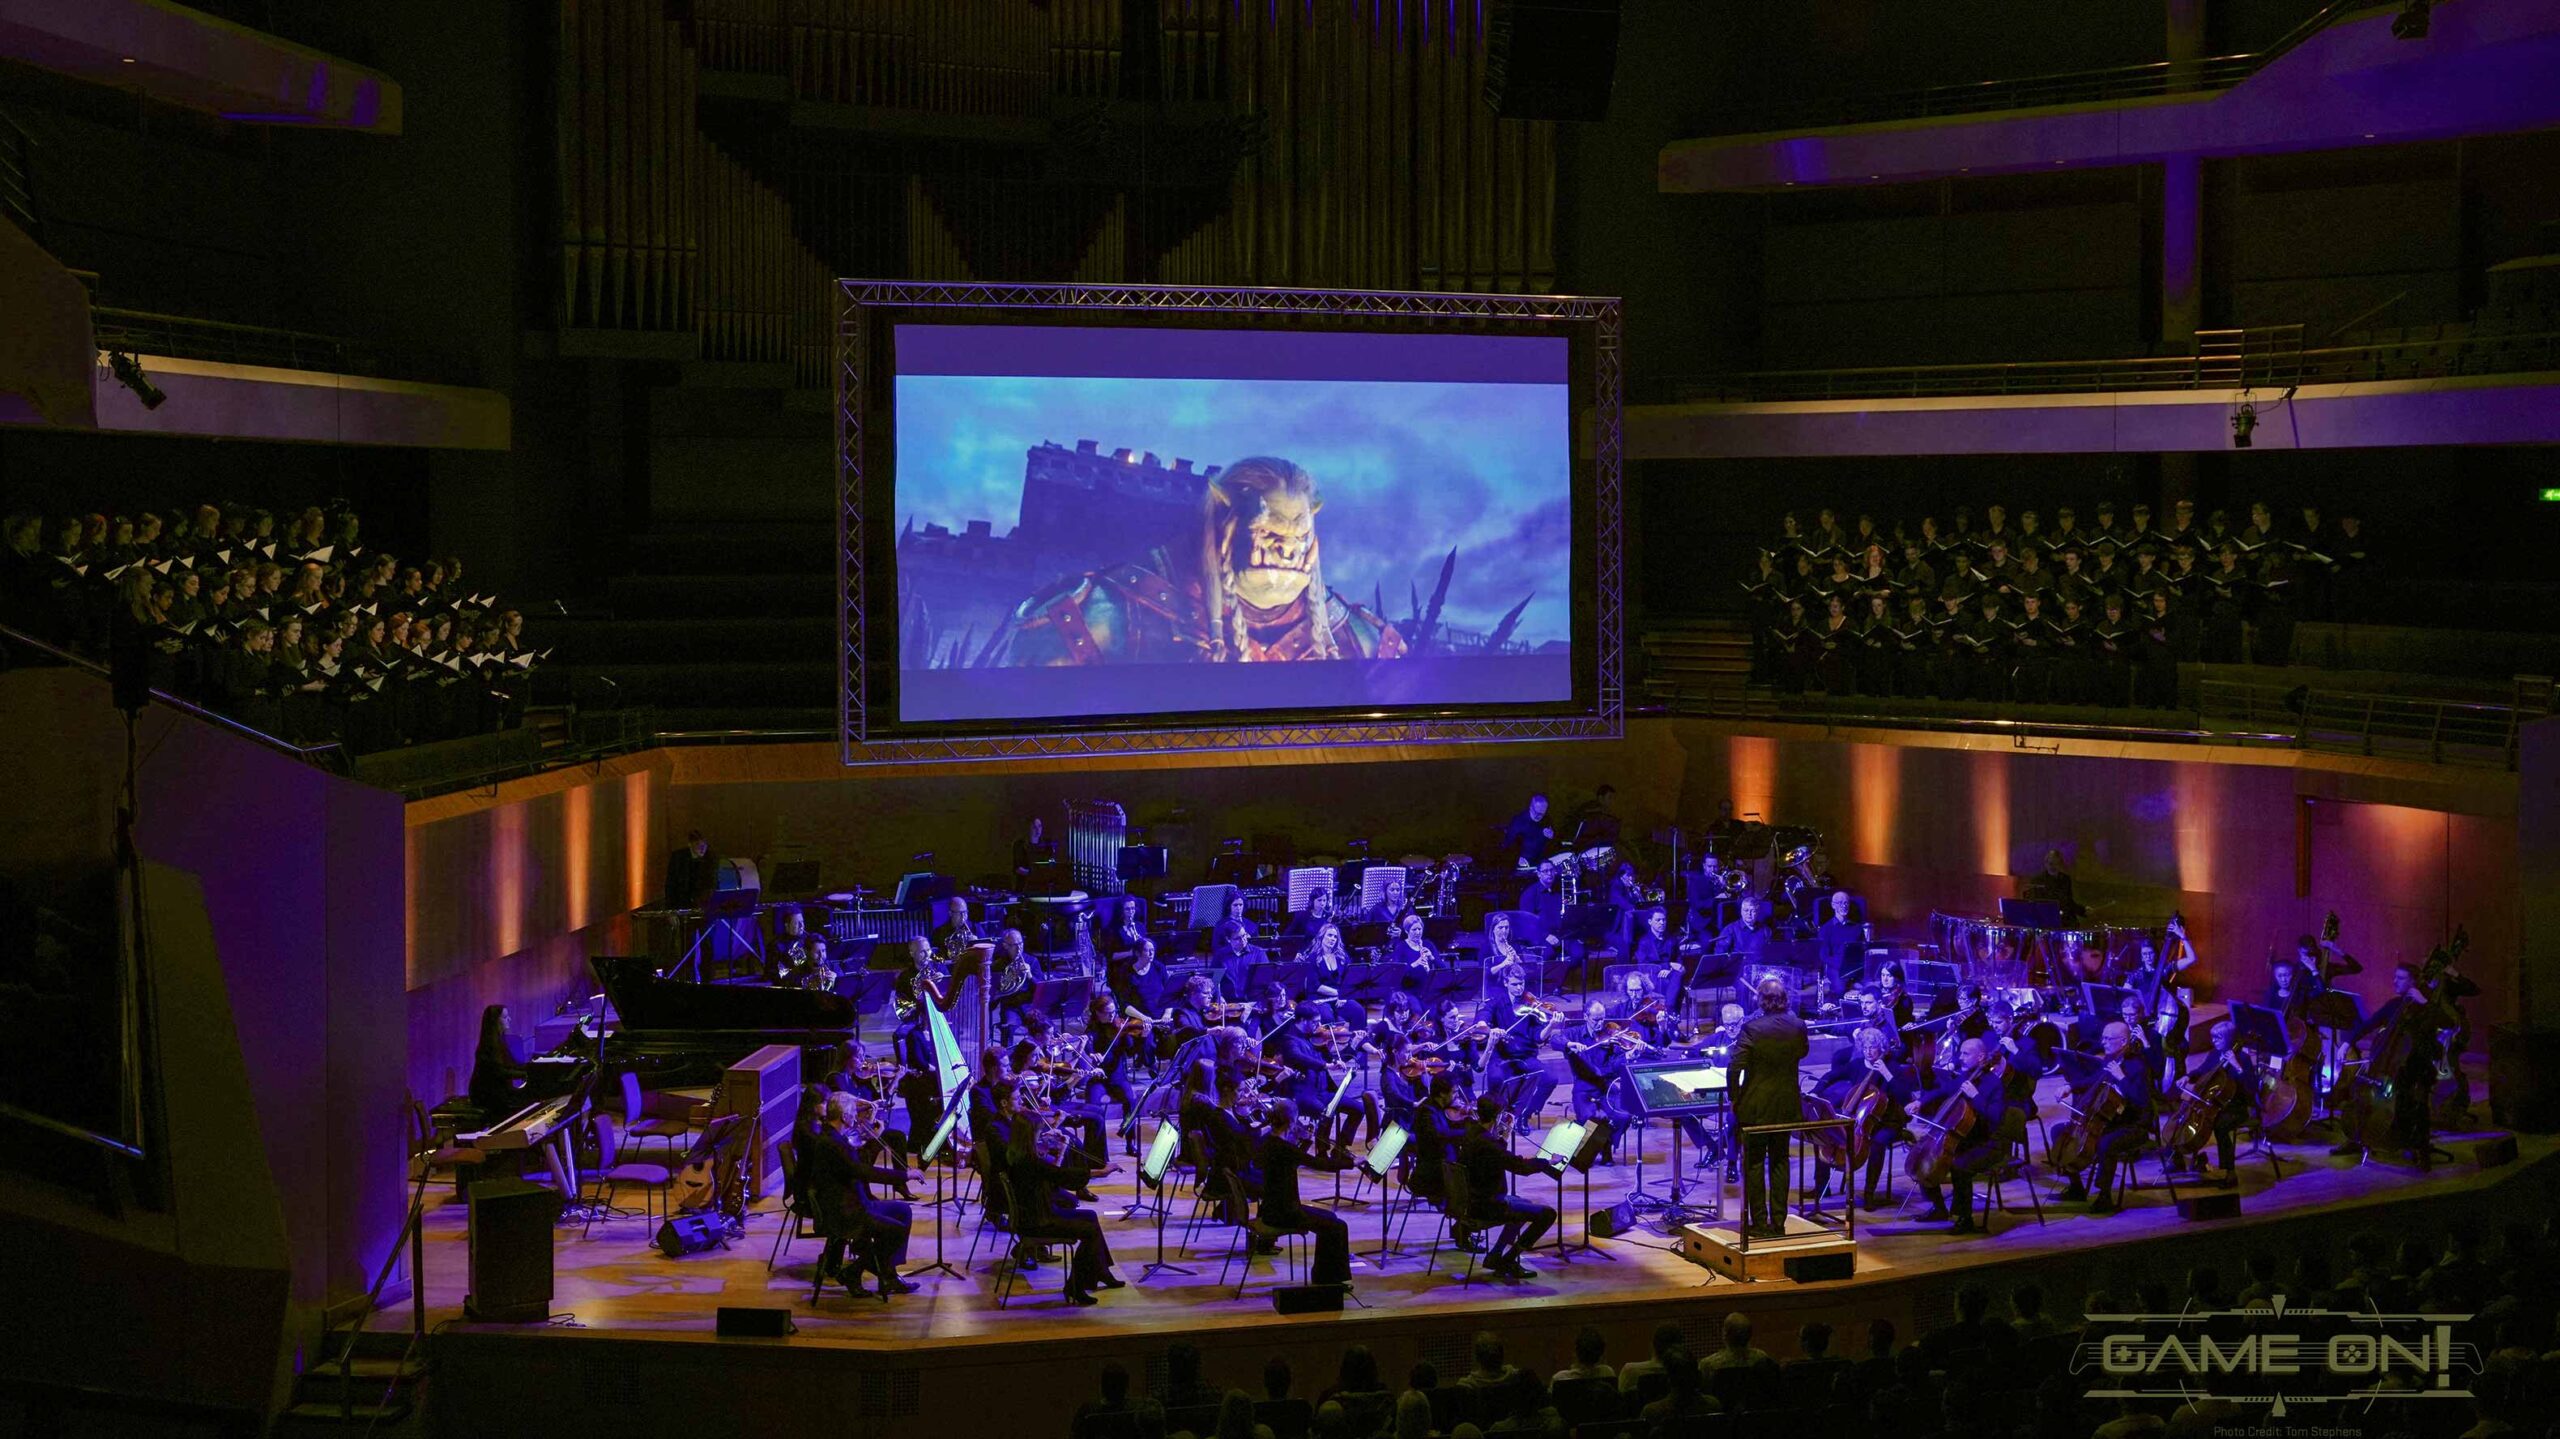 Toronto to Host Major Video Game Concert This Month 26